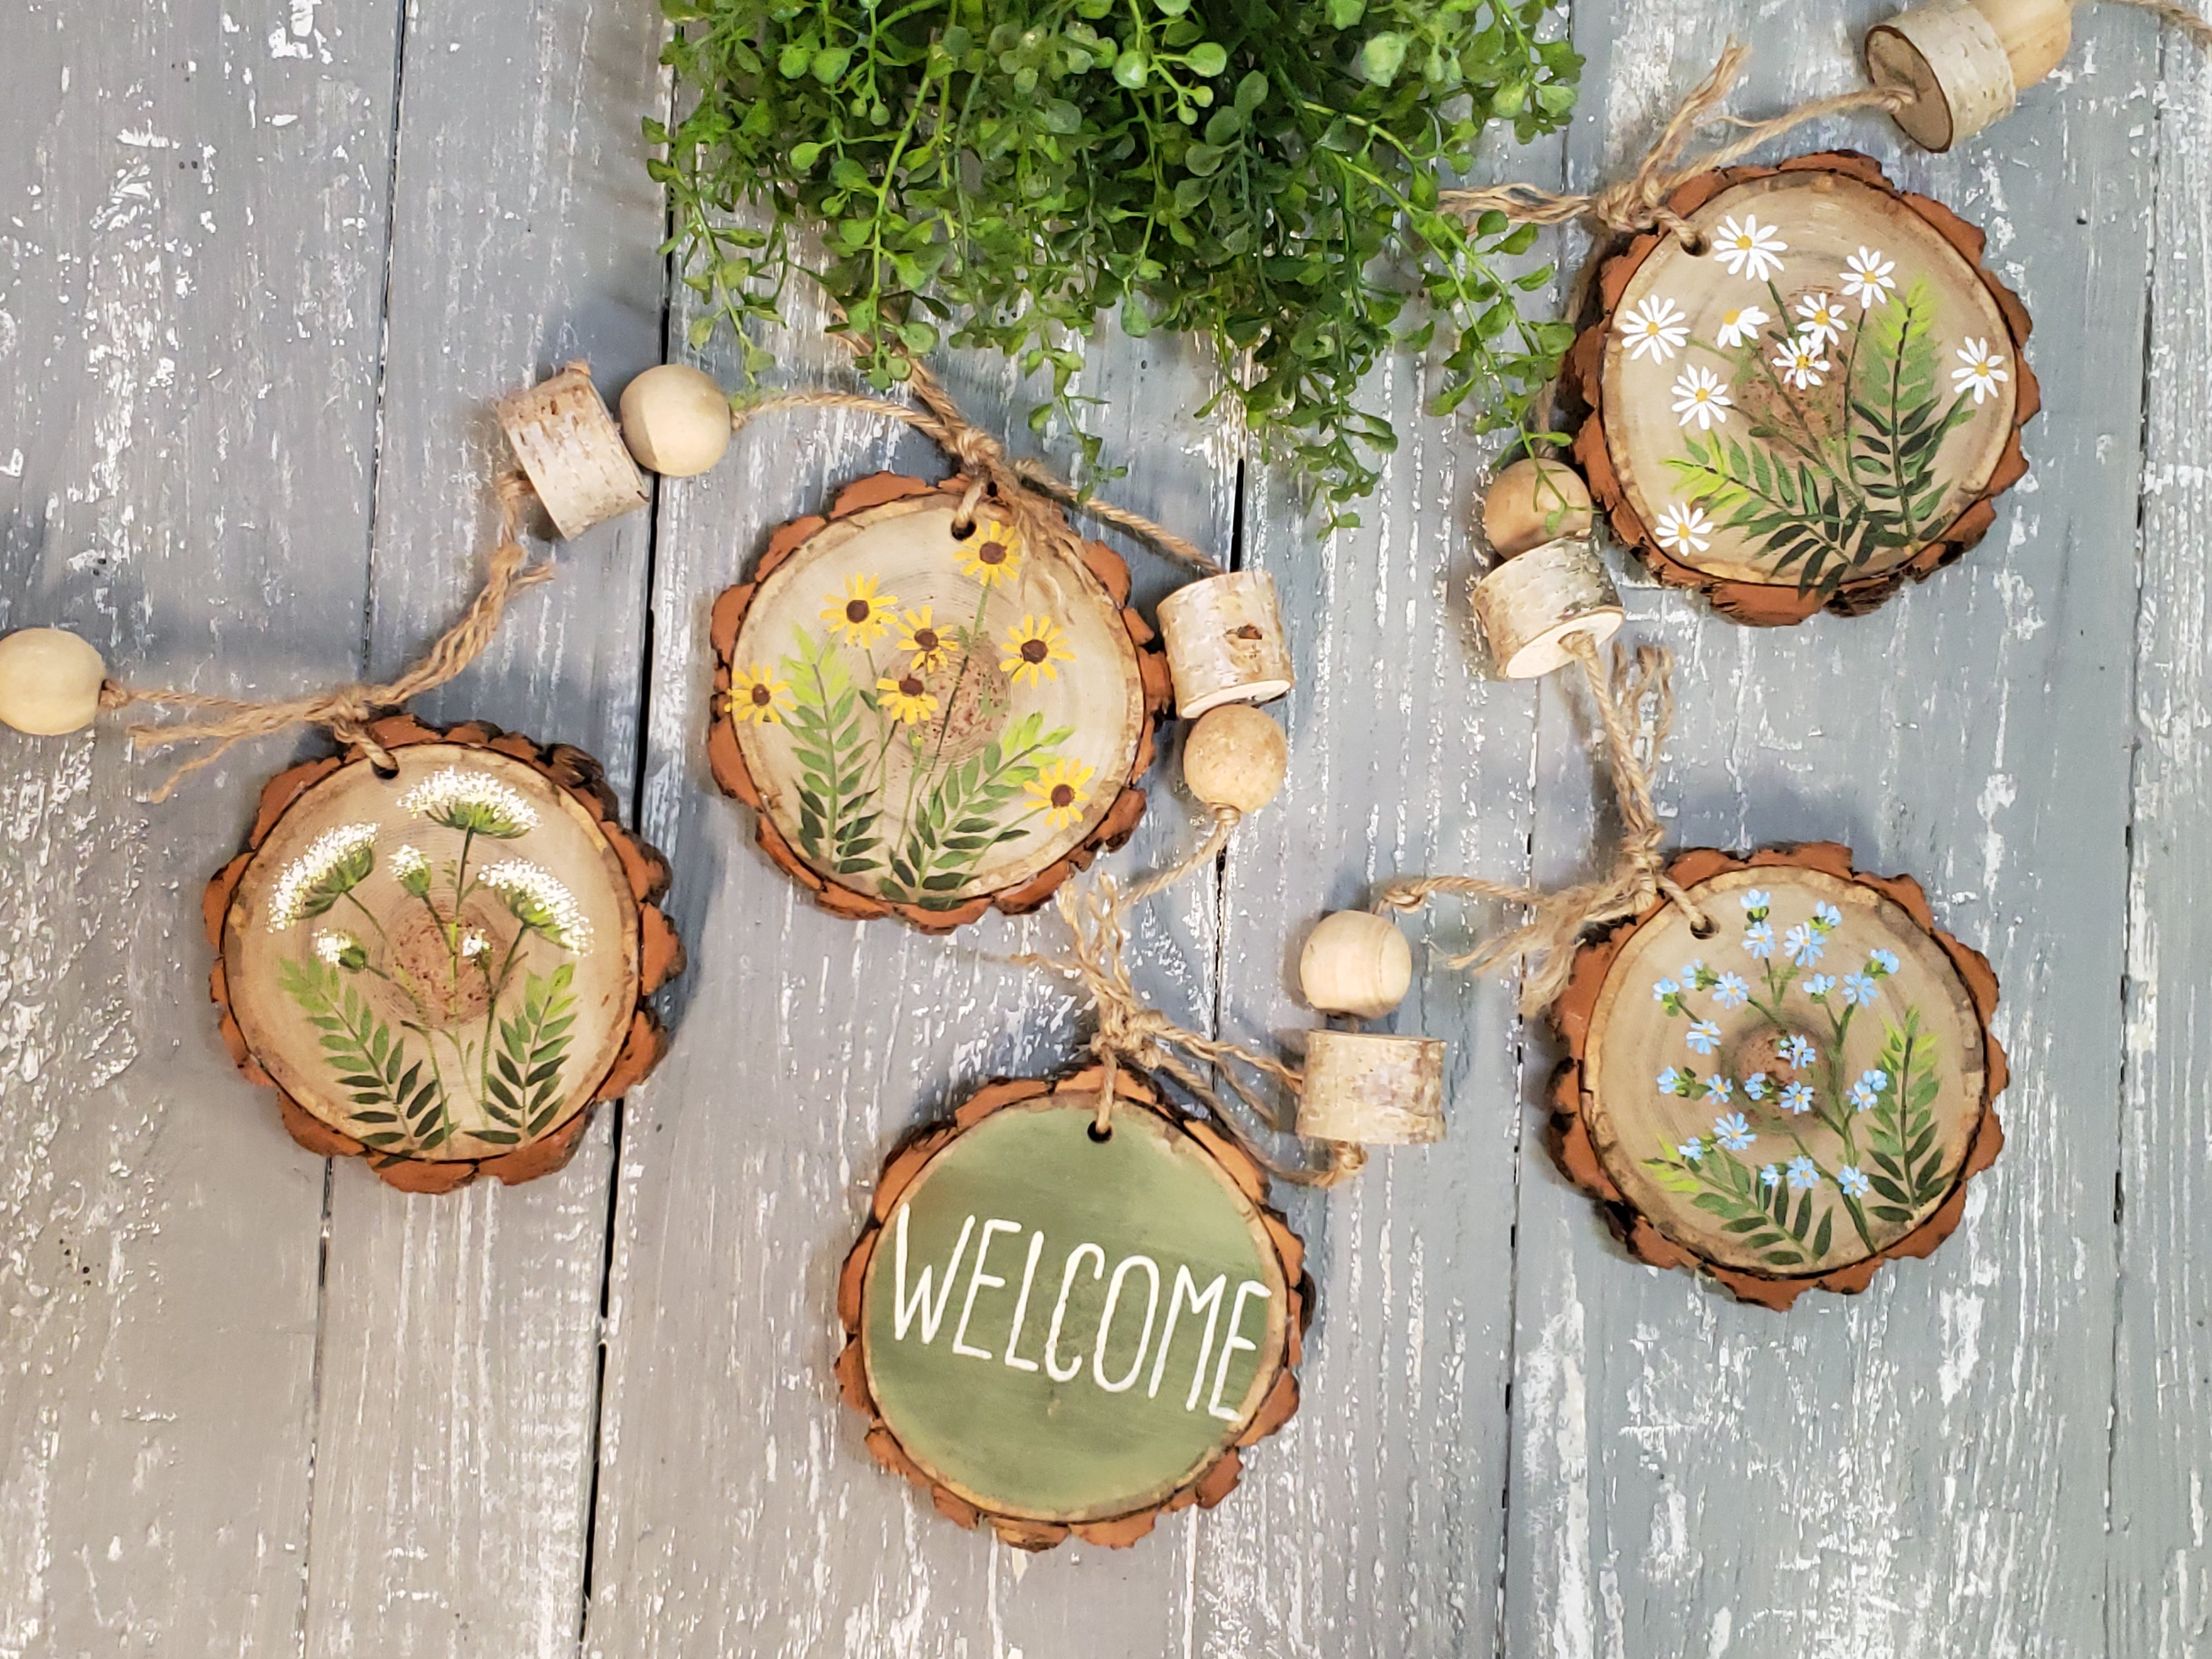 Spring and Summer Bead Garland, Wild flower Rustic Wood Slice ornaments, Handpainted Rustic Farmhouse mantel garland, porch welcome sign